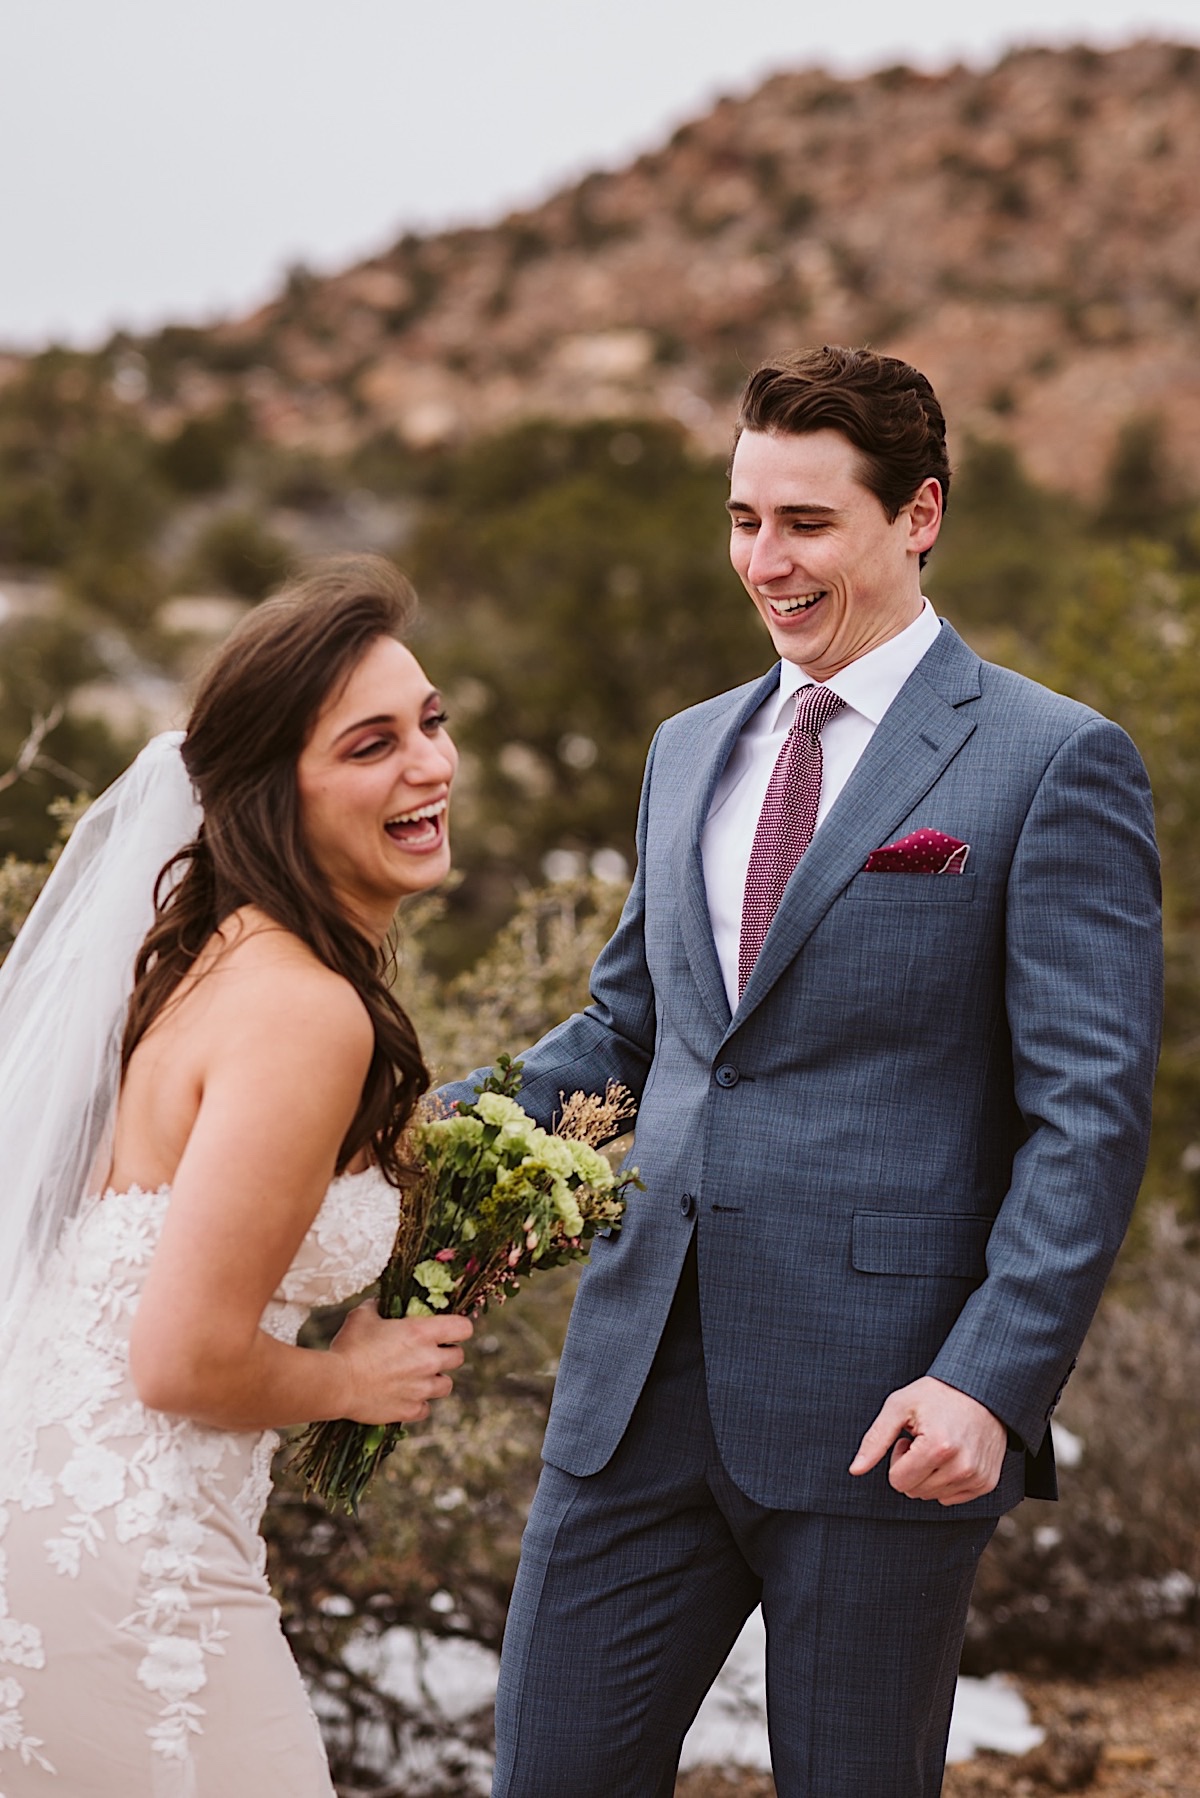 Groom wearing a blue suit with red polka dot tie and pocket square laughs with bride